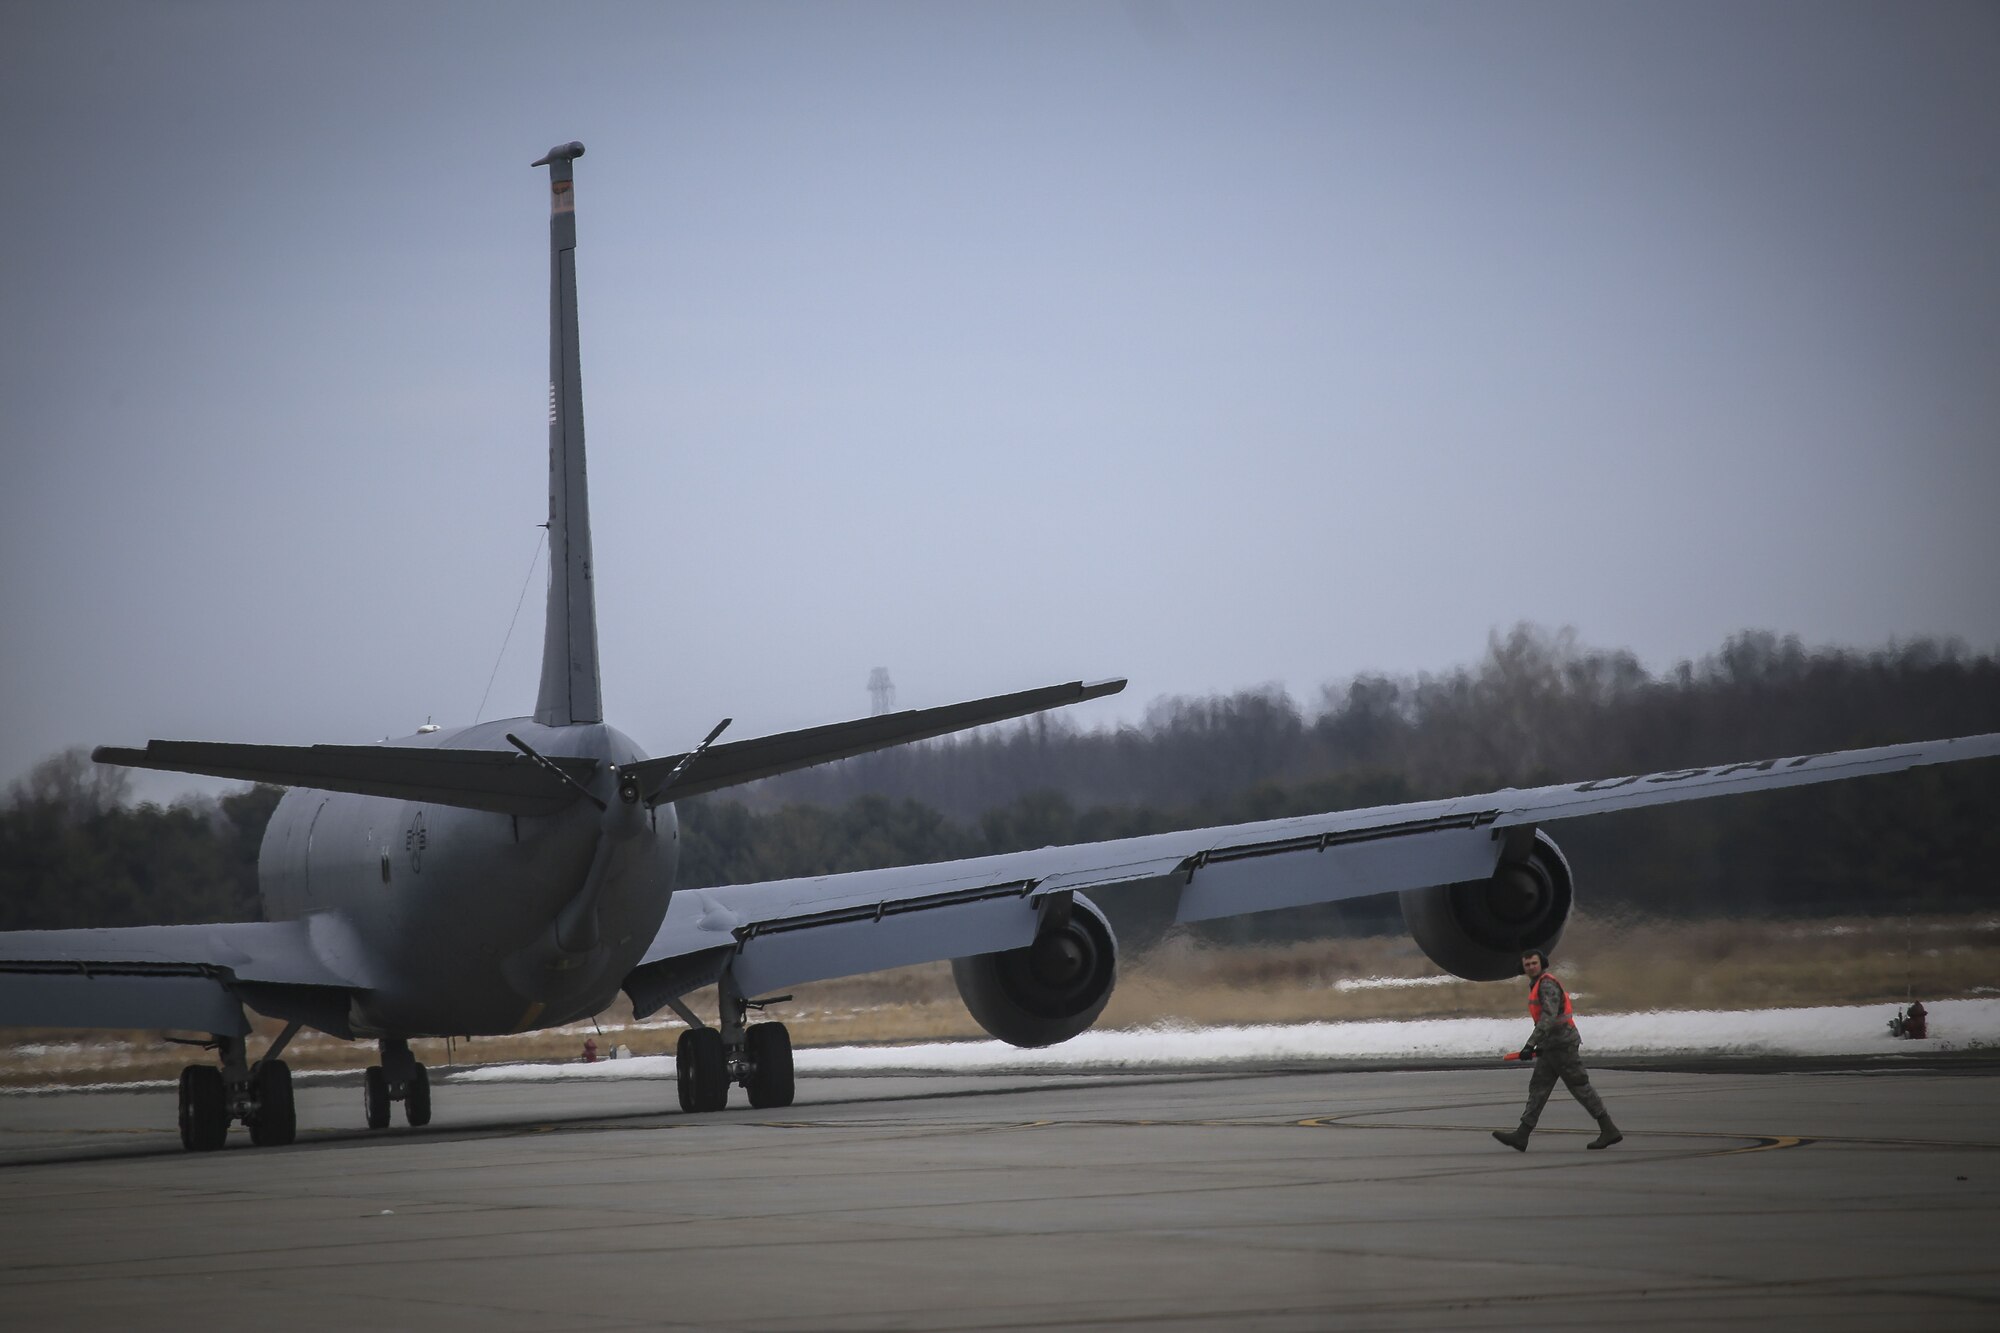 A New Jersey Air National Guard crew chief walks back to his gear after launching a 108th Wing KC-135R Stratotanker for a training flight on Joint Base McGuire-Dix-Lakehurst, N.J., Jan. 11, 2018. (U.S. Air National Guard photo by Master Sgt. Matt Hecht)